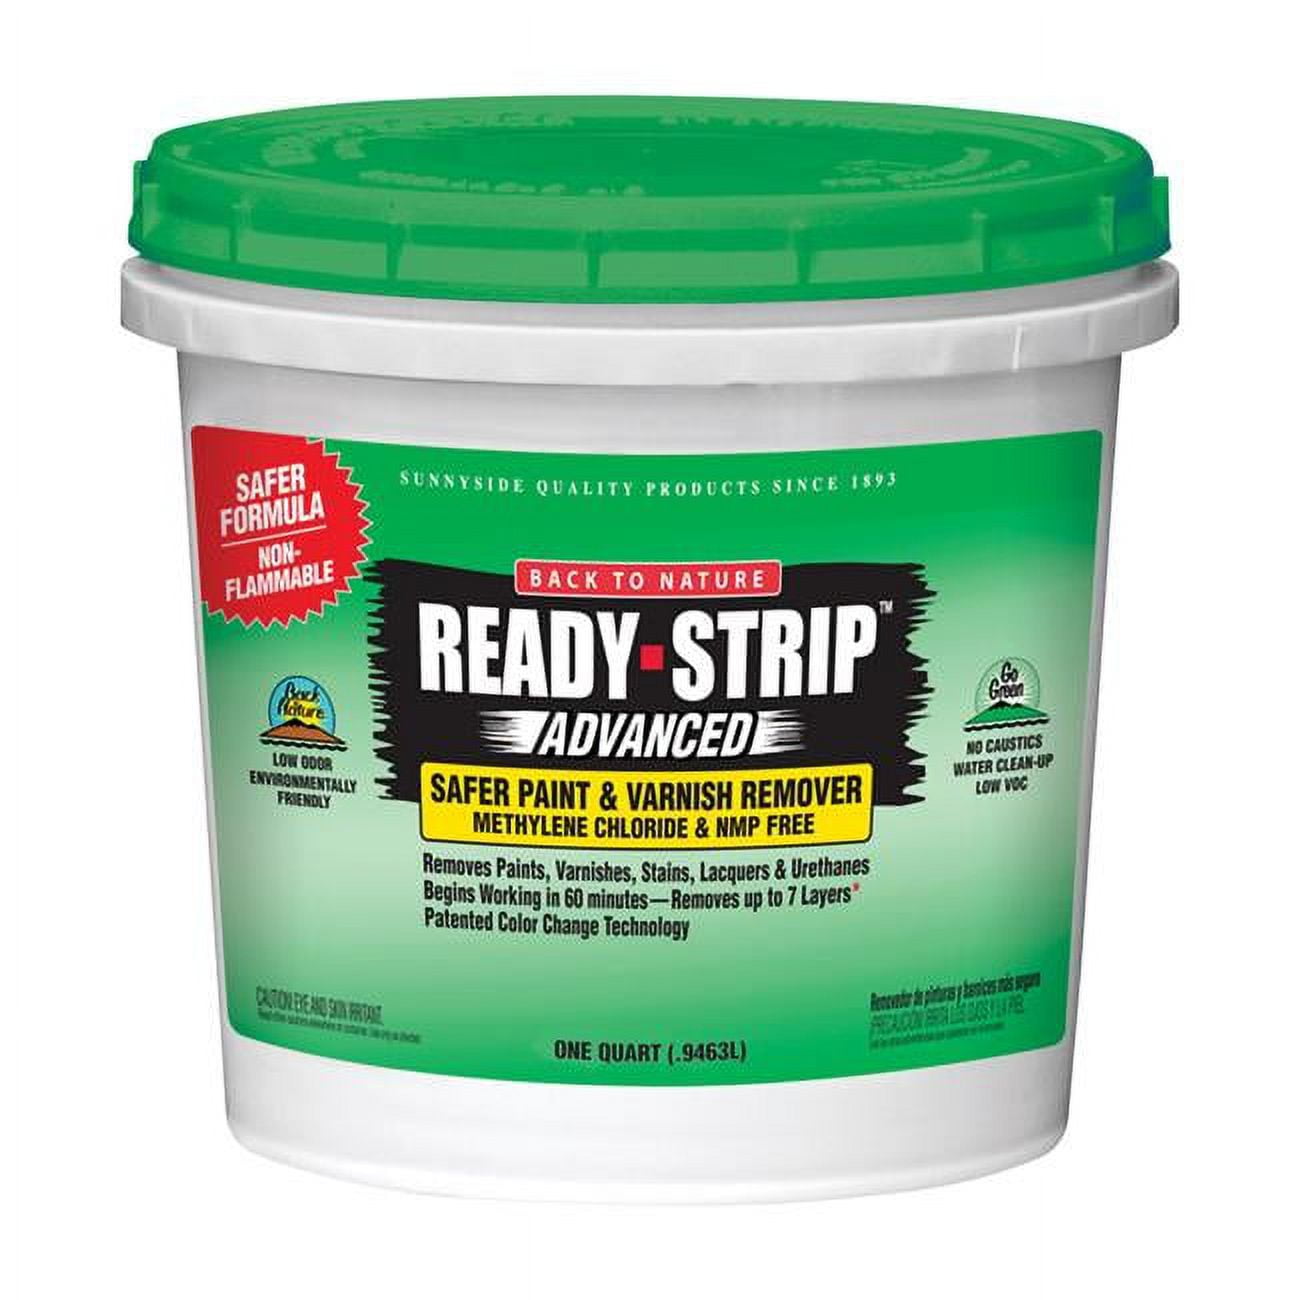 1938018 Ready-strip Advanced Paint & Varnish Remover, 1 Qt. - Case Of 6